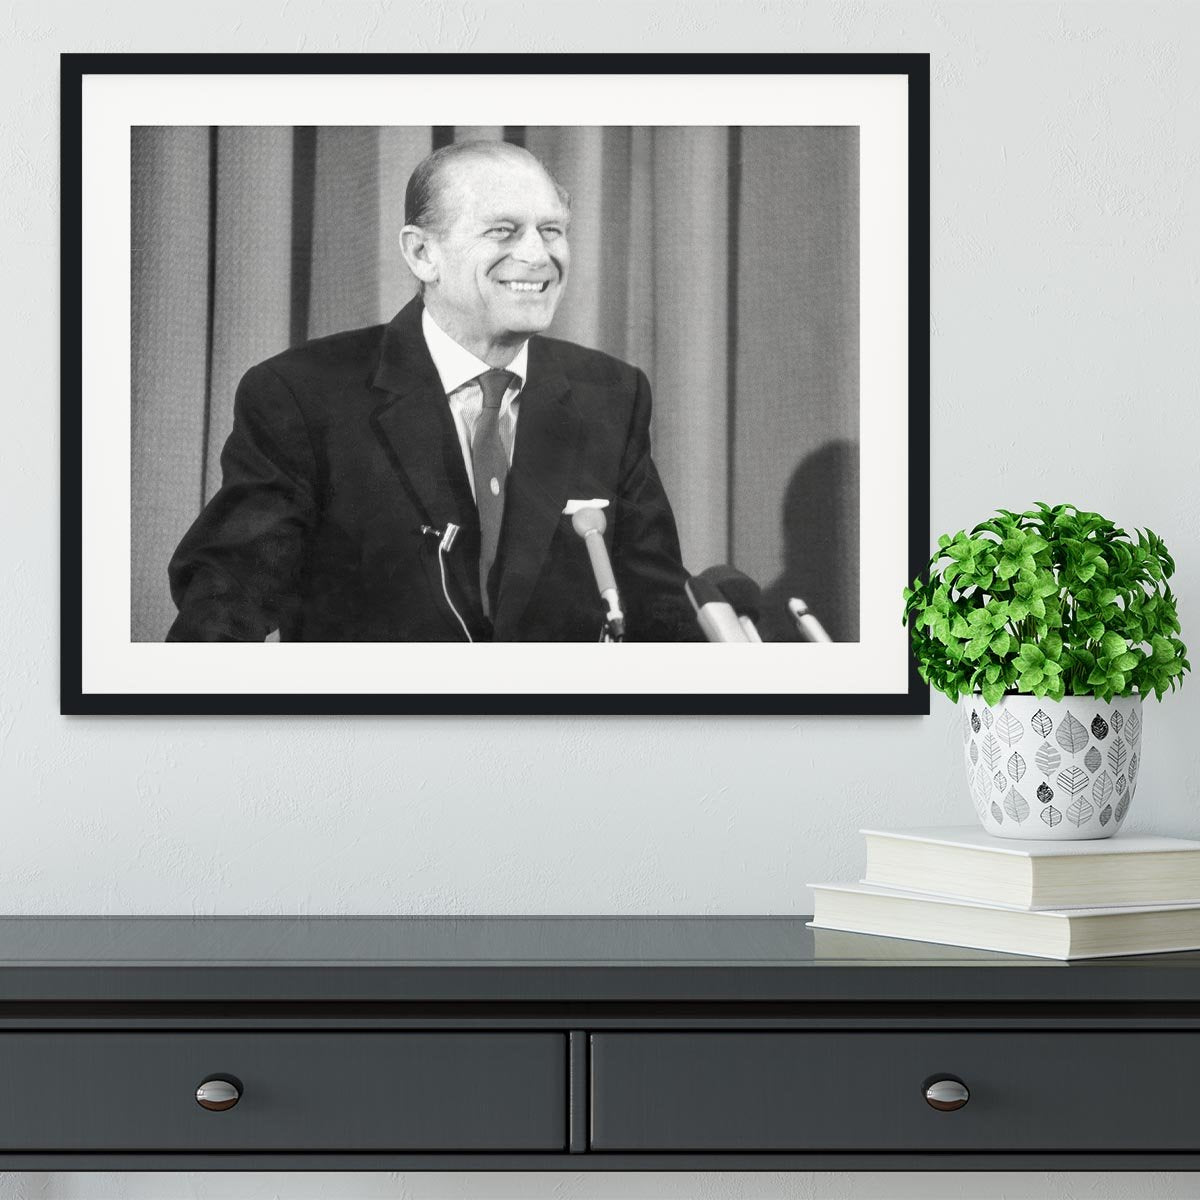 Prince Philip giving a lecture at Hudson Bay House Framed Print - Canvas Art Rocks - 1